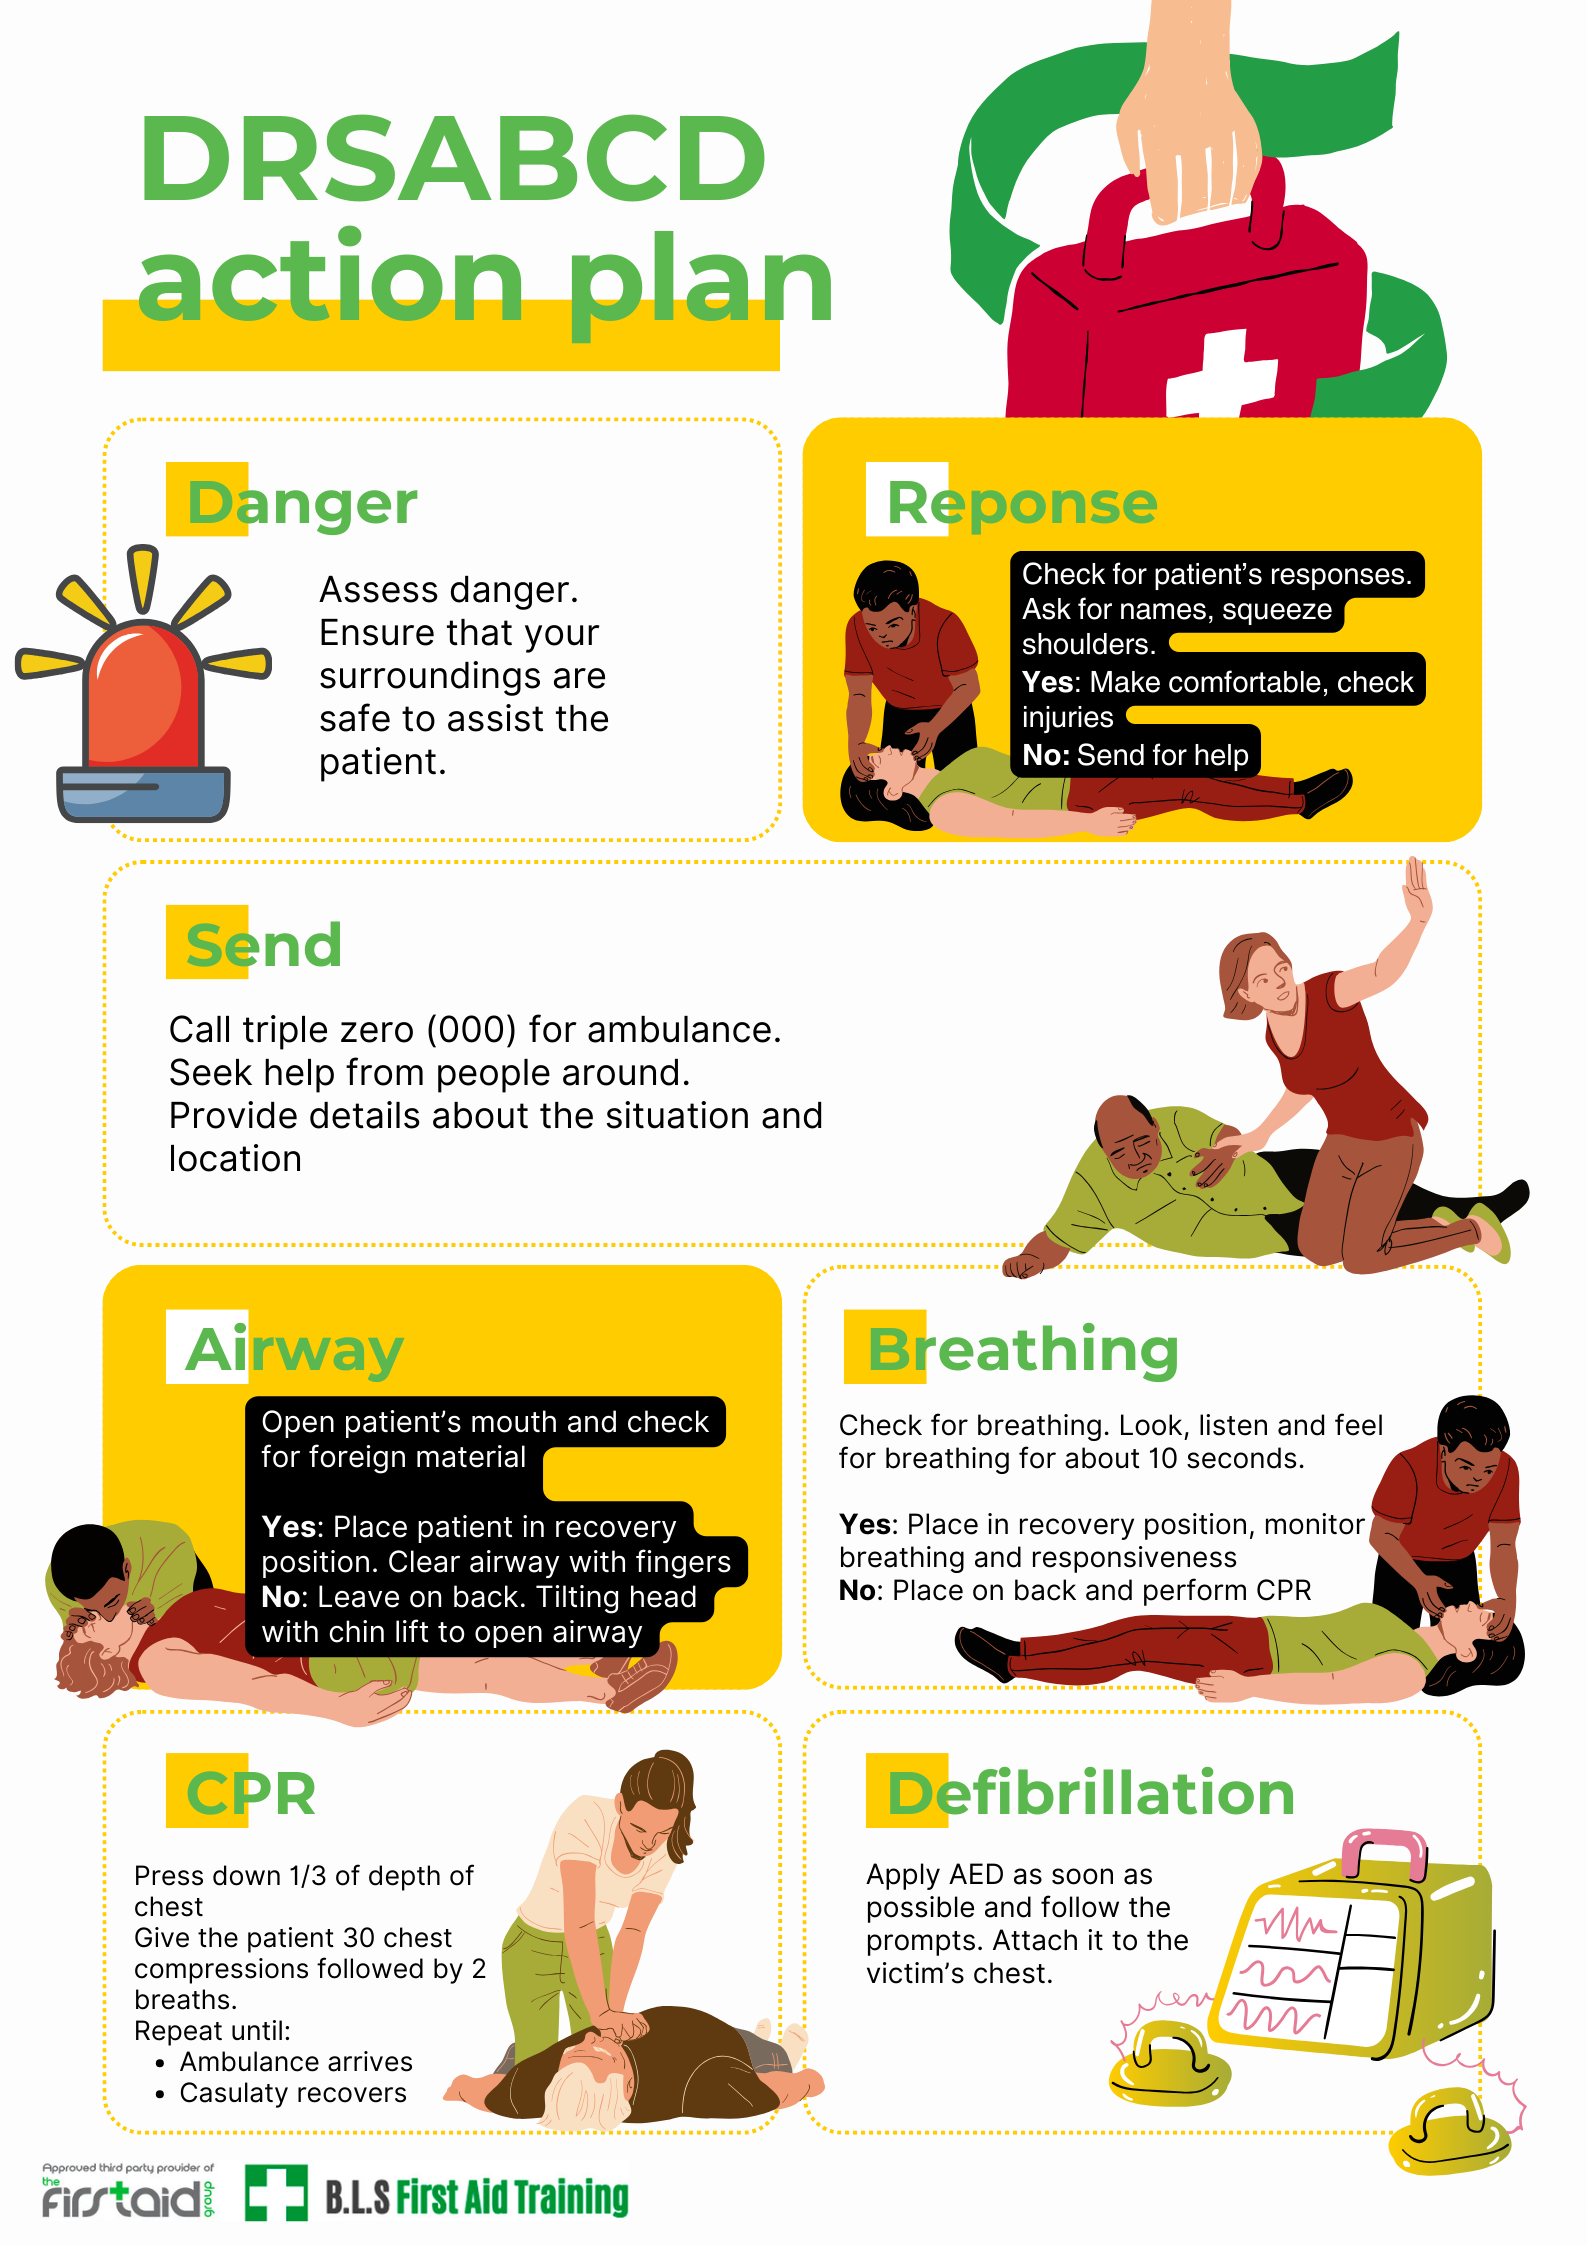 First Aid Basics: The 7 Steps of First Aid, DRSABCD